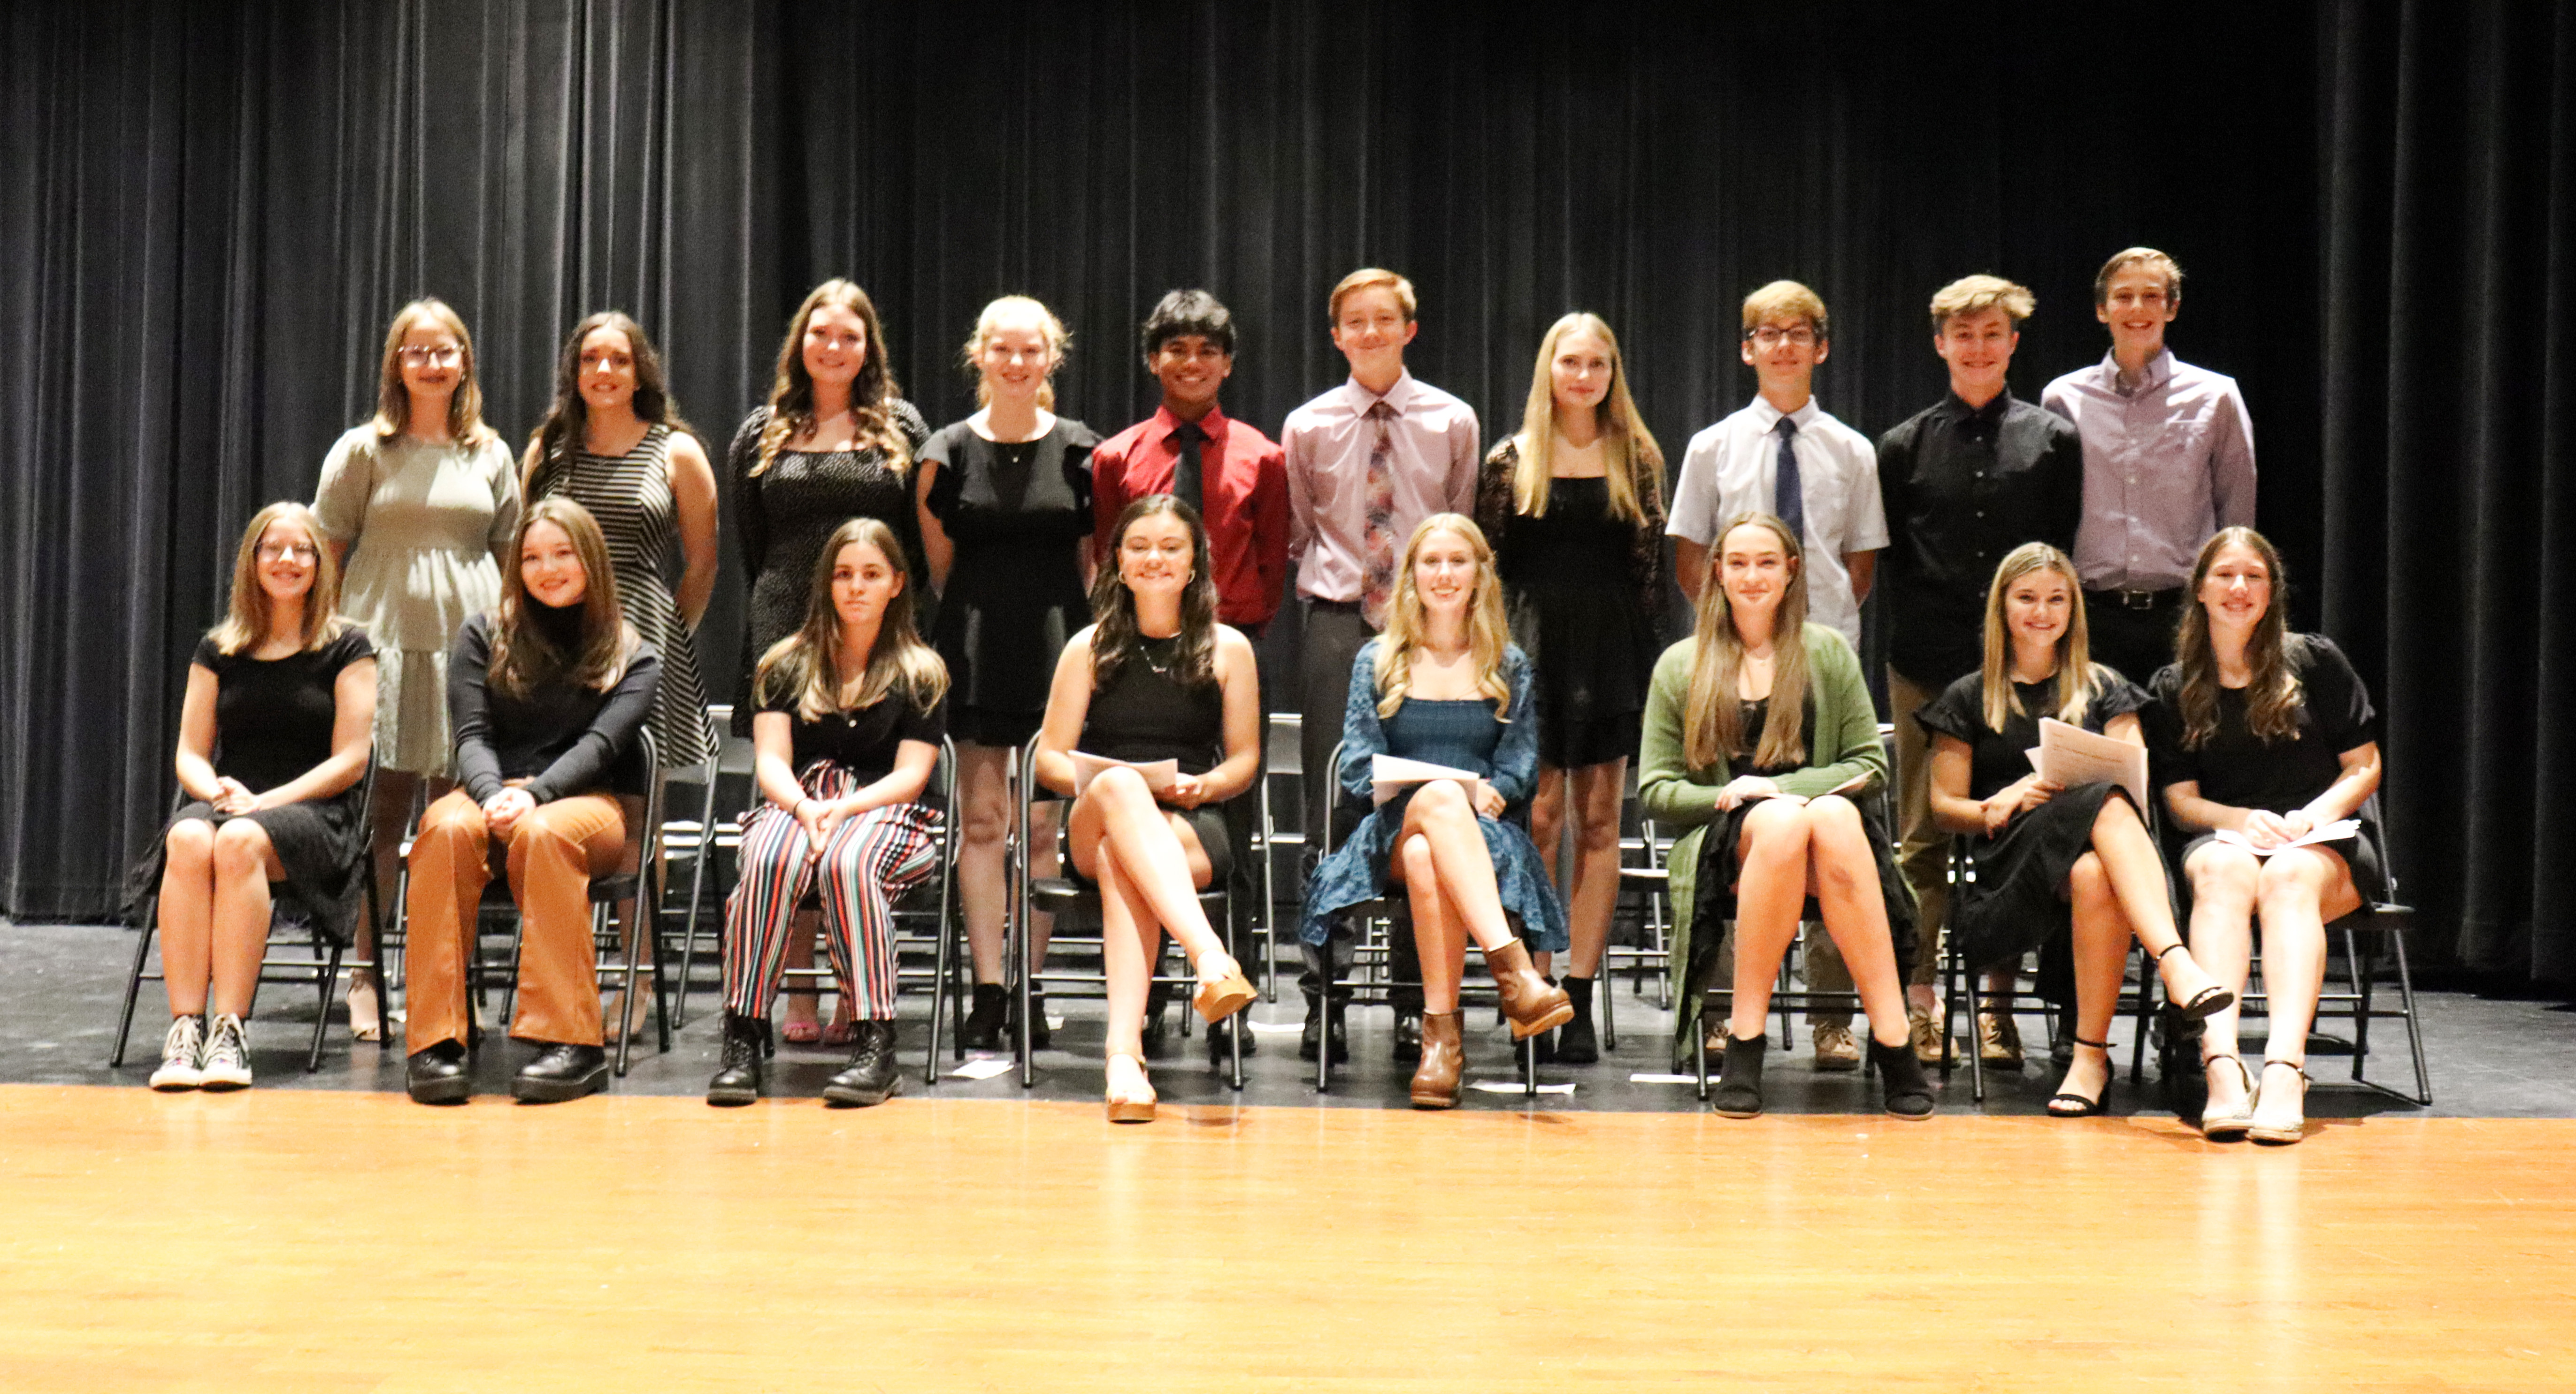 Union Springs Inducts 18 Students into National Honor Society